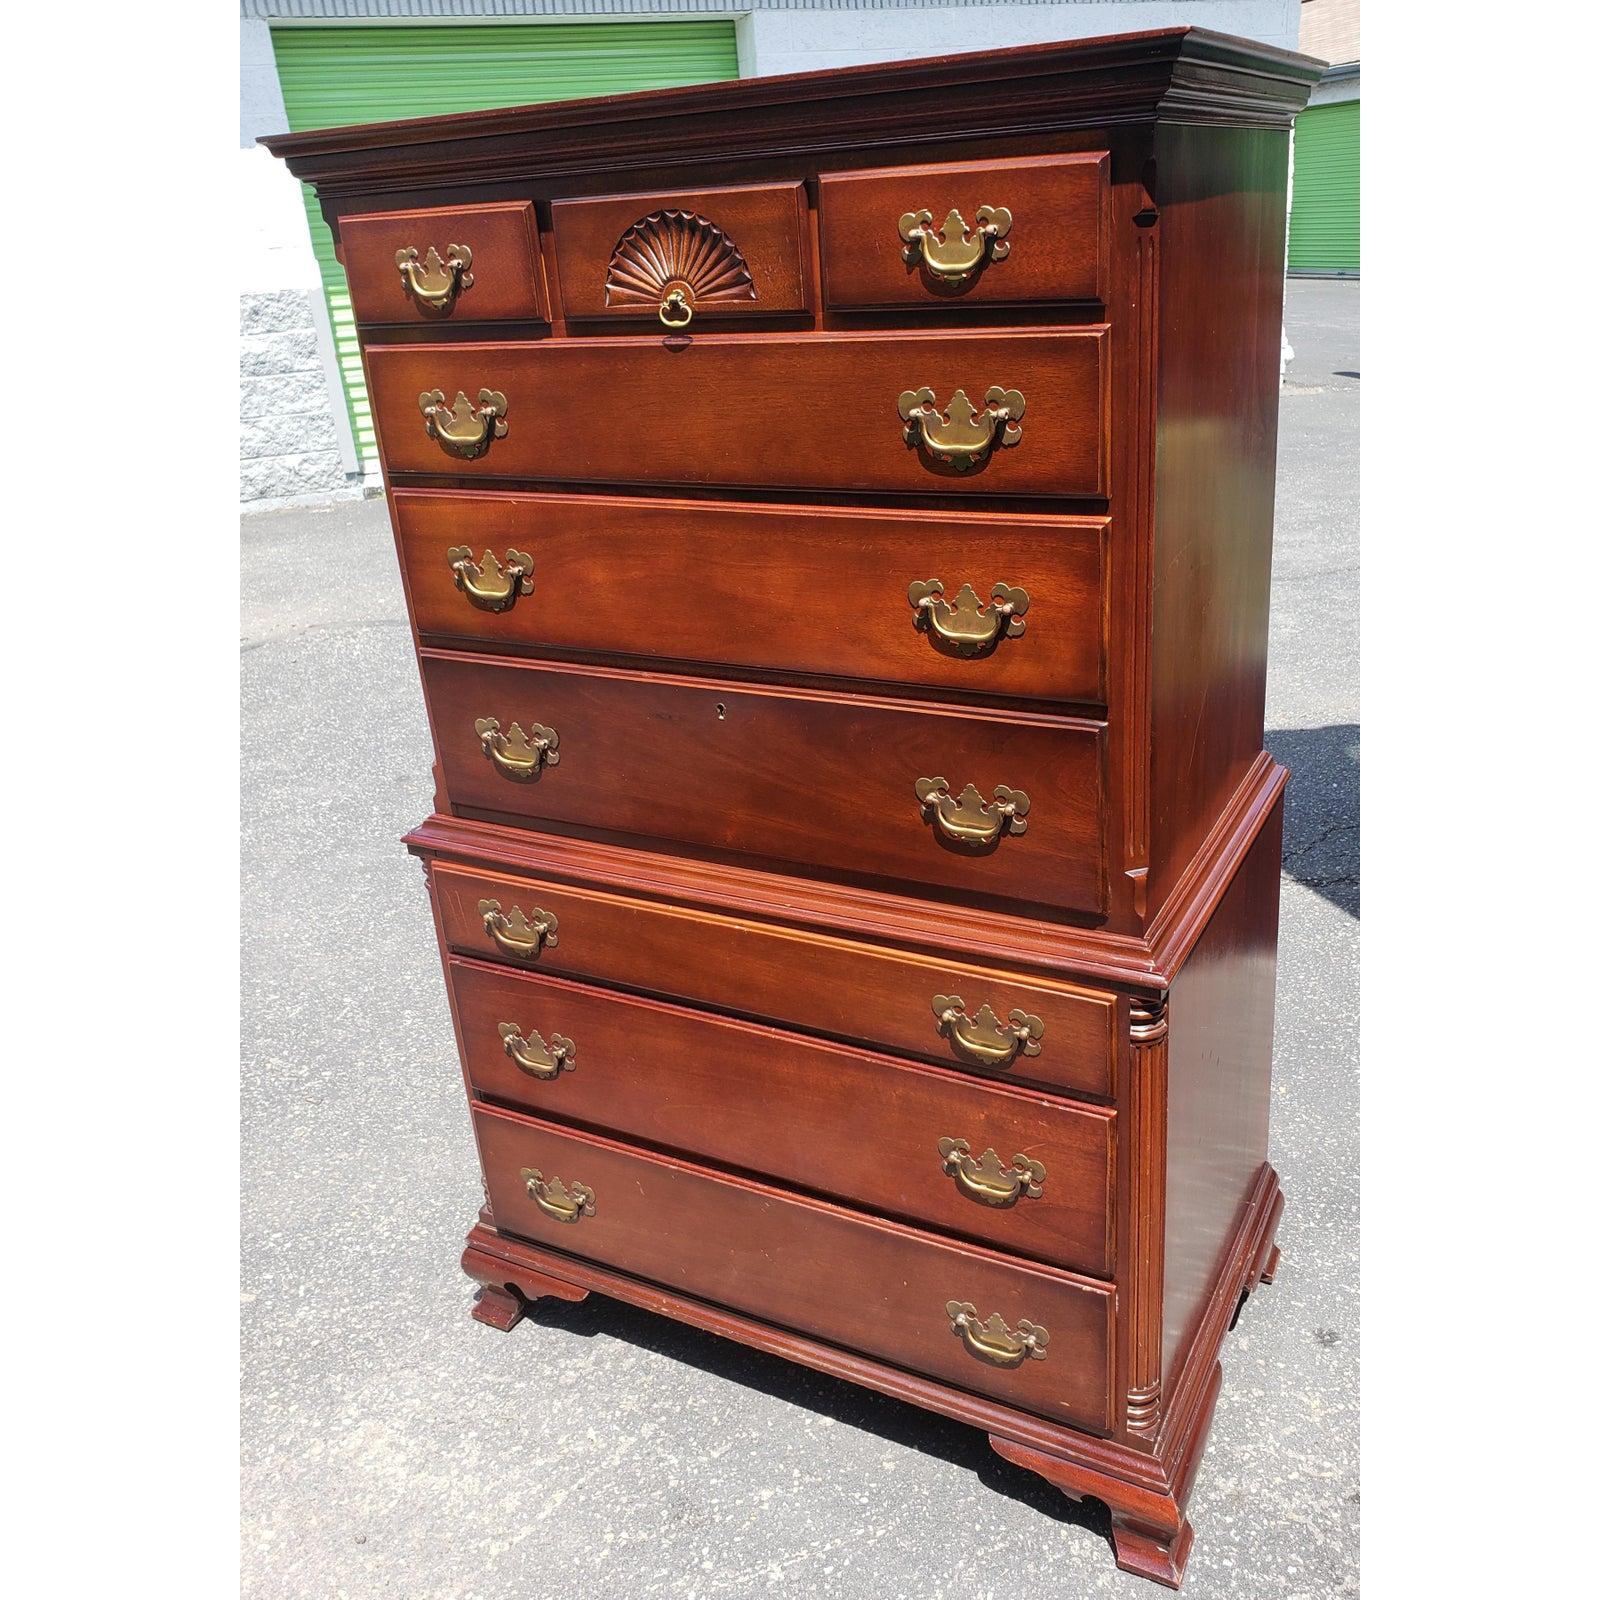 Genuine mahogany chest on chest of drawers by famous Kling Furniture.
All drawers work as originally intented. Original hardwares.
9 functuonal mahogany drawers.
Very sturdy construction.
Measures 38W x 18D x 53H.
  